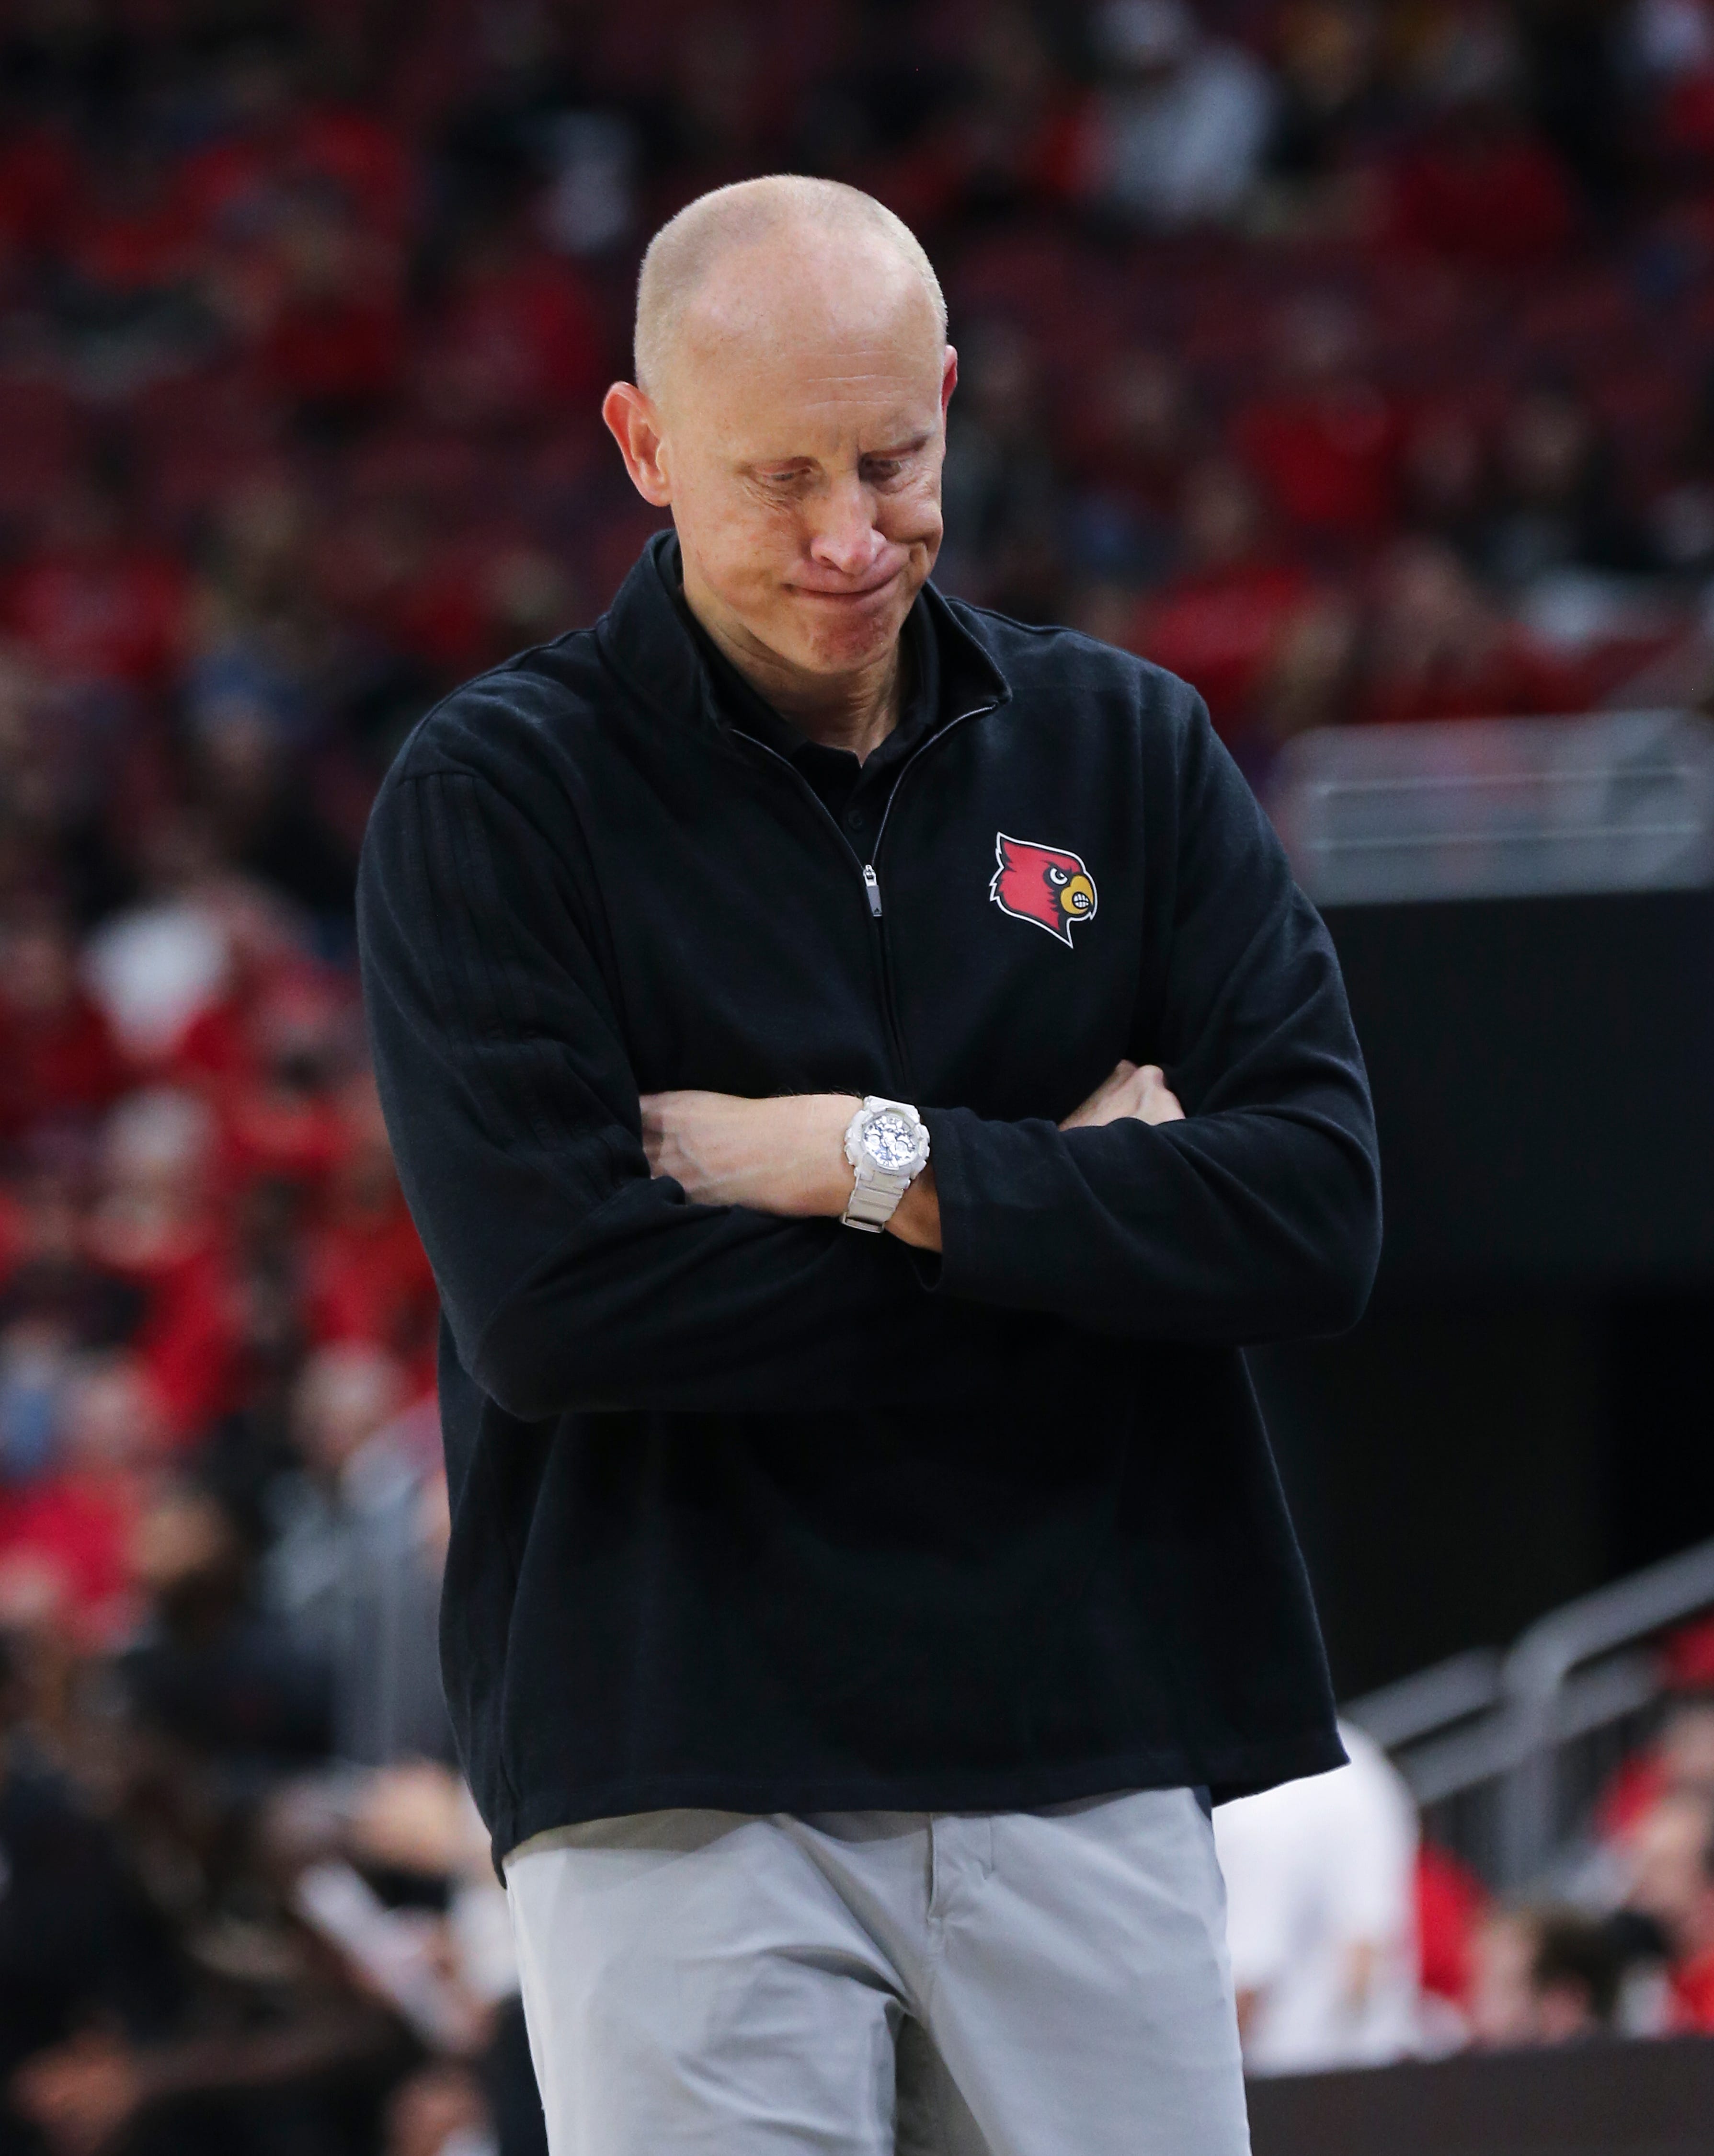 'I ain't bitter at all': Louisville and men's basketball coach Chris Mack officially part ways